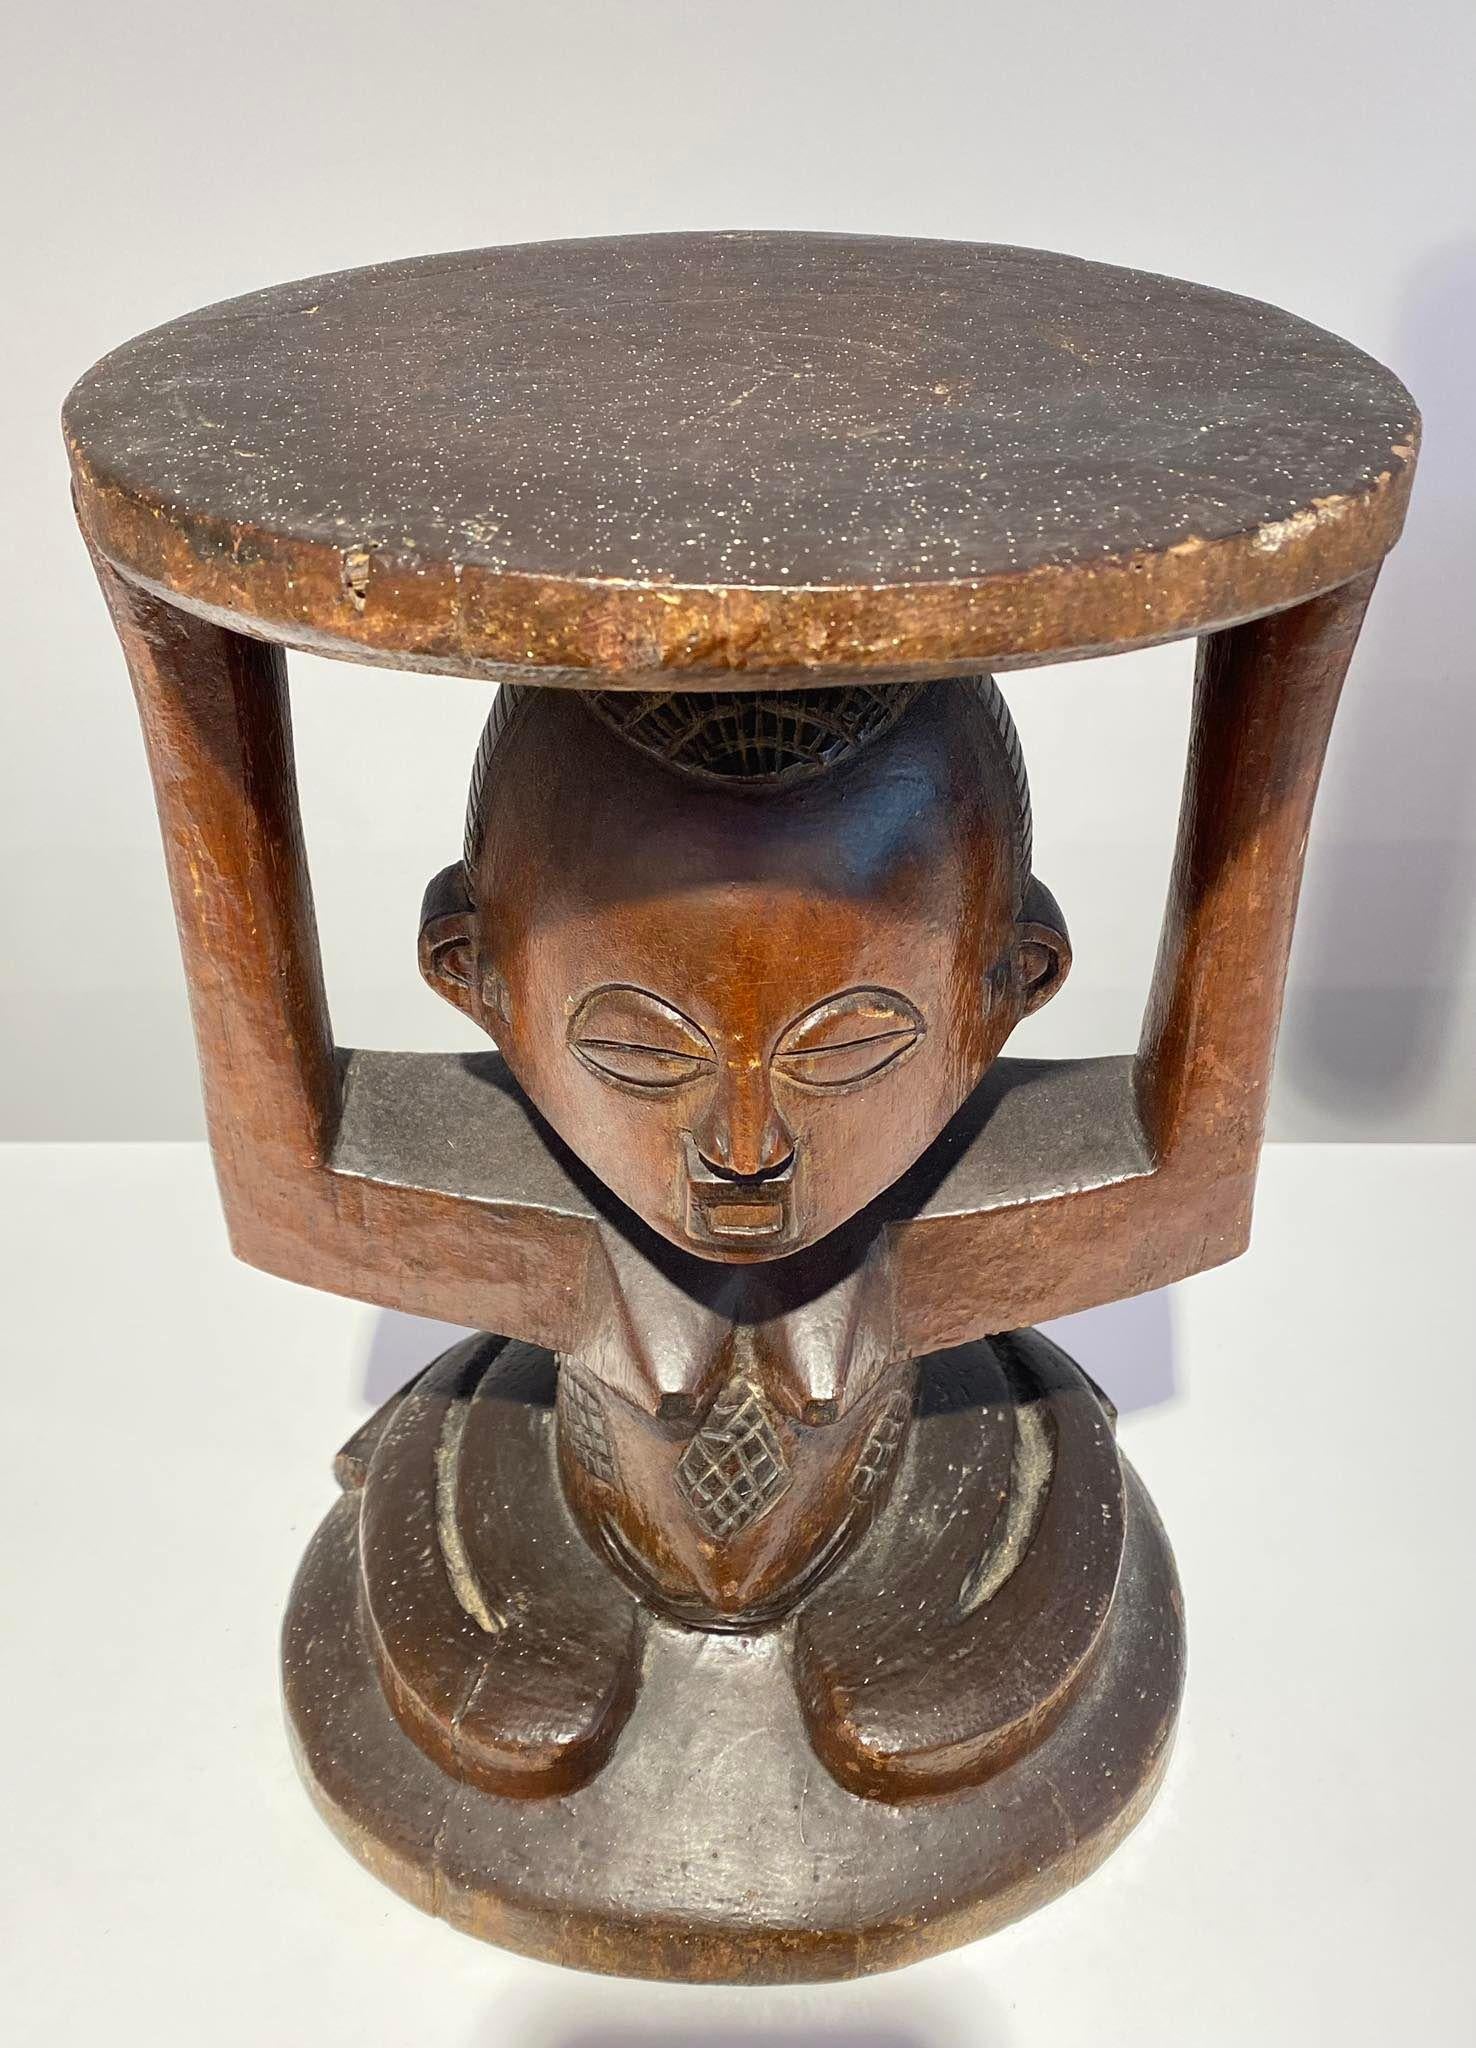 Rare Royal caryatid seat Luba Rd Congo in Cubist style and cascade shaped coiffure (see pictures).
Patina of use
Height: 35cm
Early 20th century (around 1920).
Superb and rare exceptional piece of museum quality